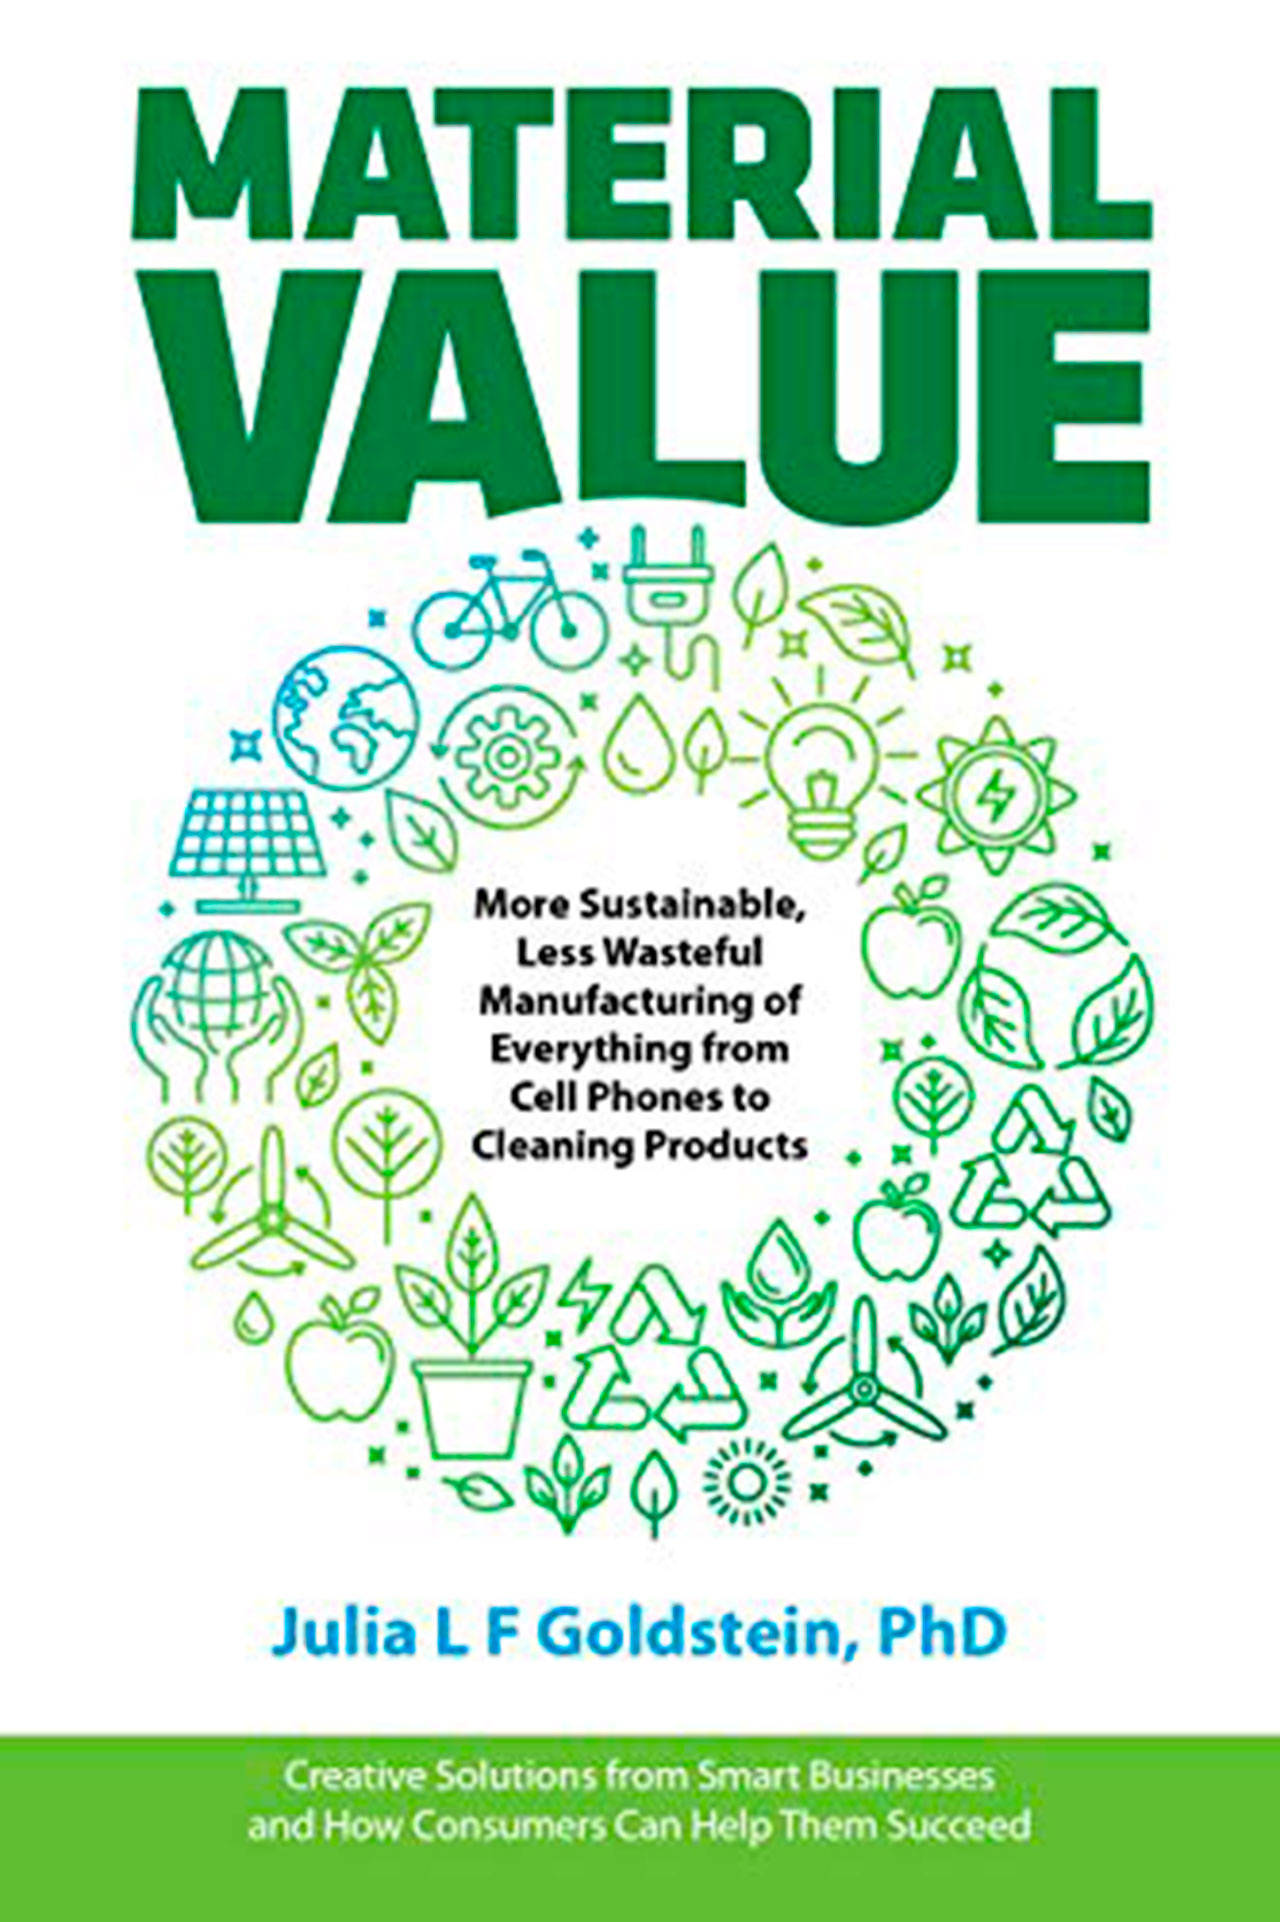 Image courtesy of Eagle Harbor Book Company | Julie L.F. Goldstein will visit Eagle Harbor Book Company at 7 p.m. Thursday, May 16 to discuss her new book “Material Value: More Sustainable, Less Wasteful Manufacturing of Everything from Cell Phones to Cleaning Products.”